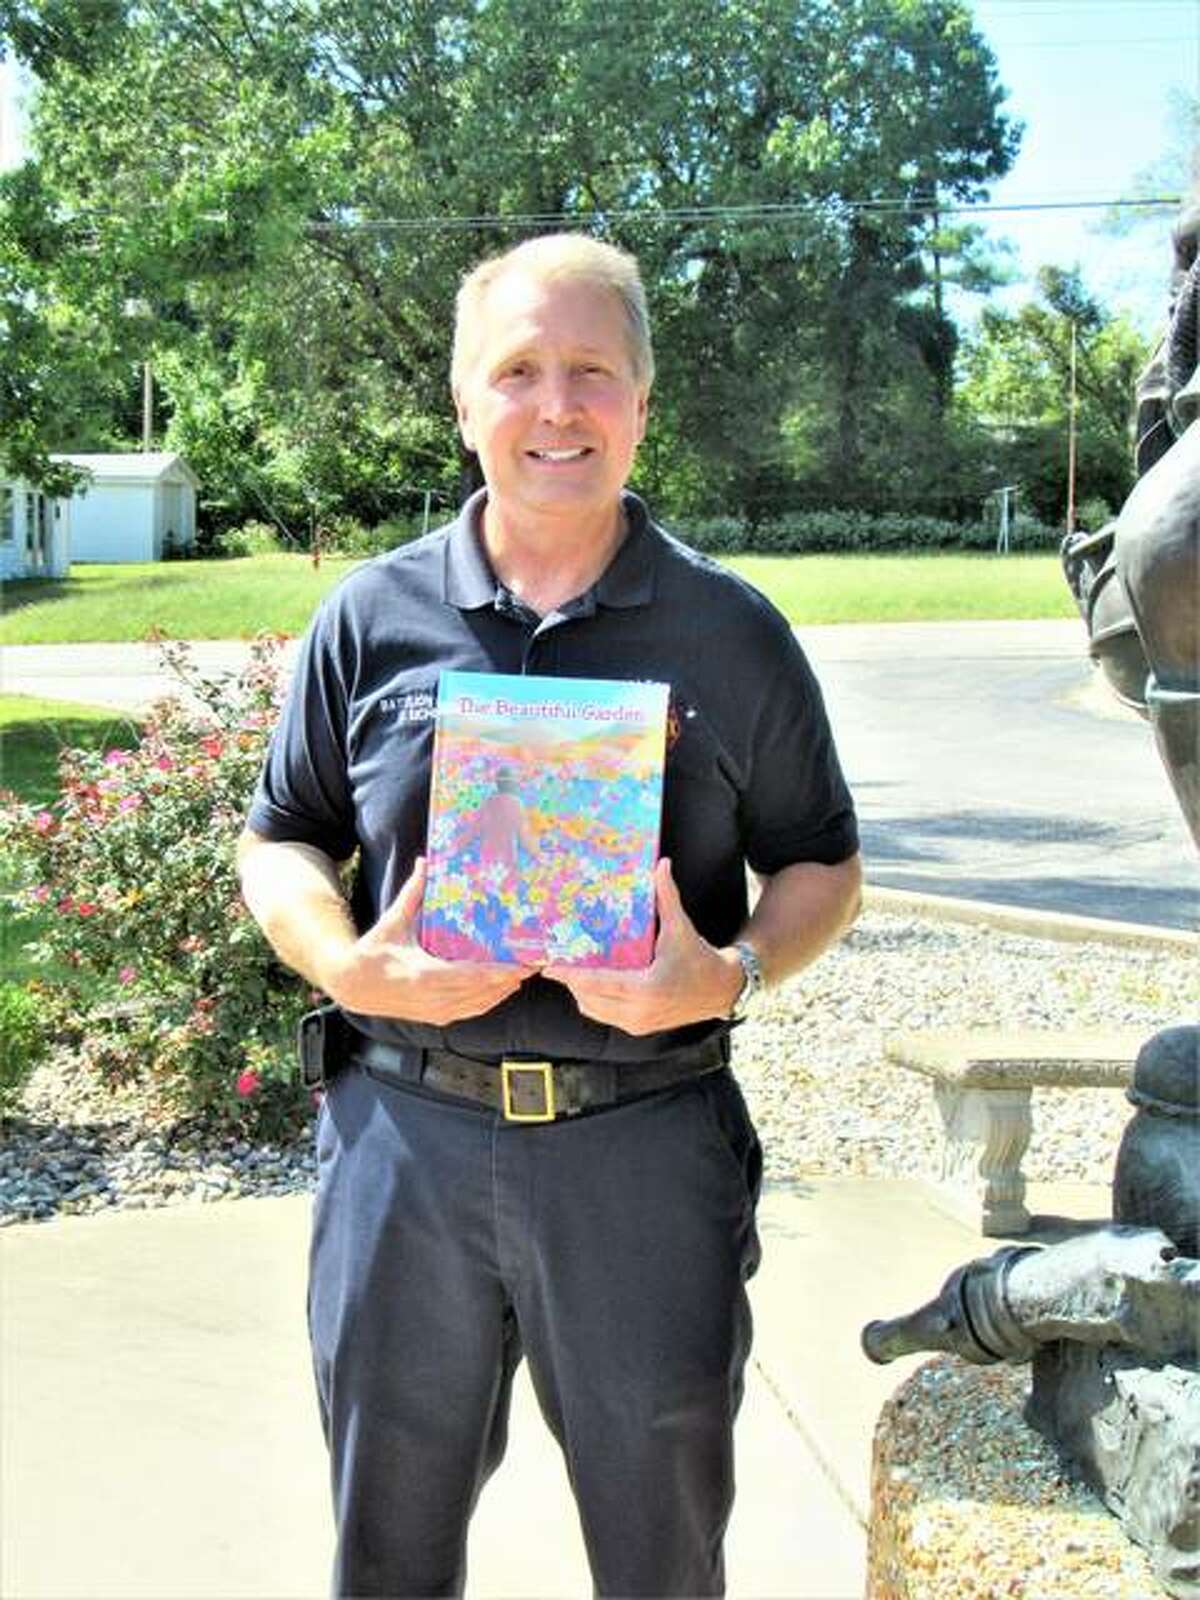 Alton Fire Department Battalion Chief Dave Eichen holds a copy of his children’s book about respect for others, “The Beautiful Garden,” which became available July 23.